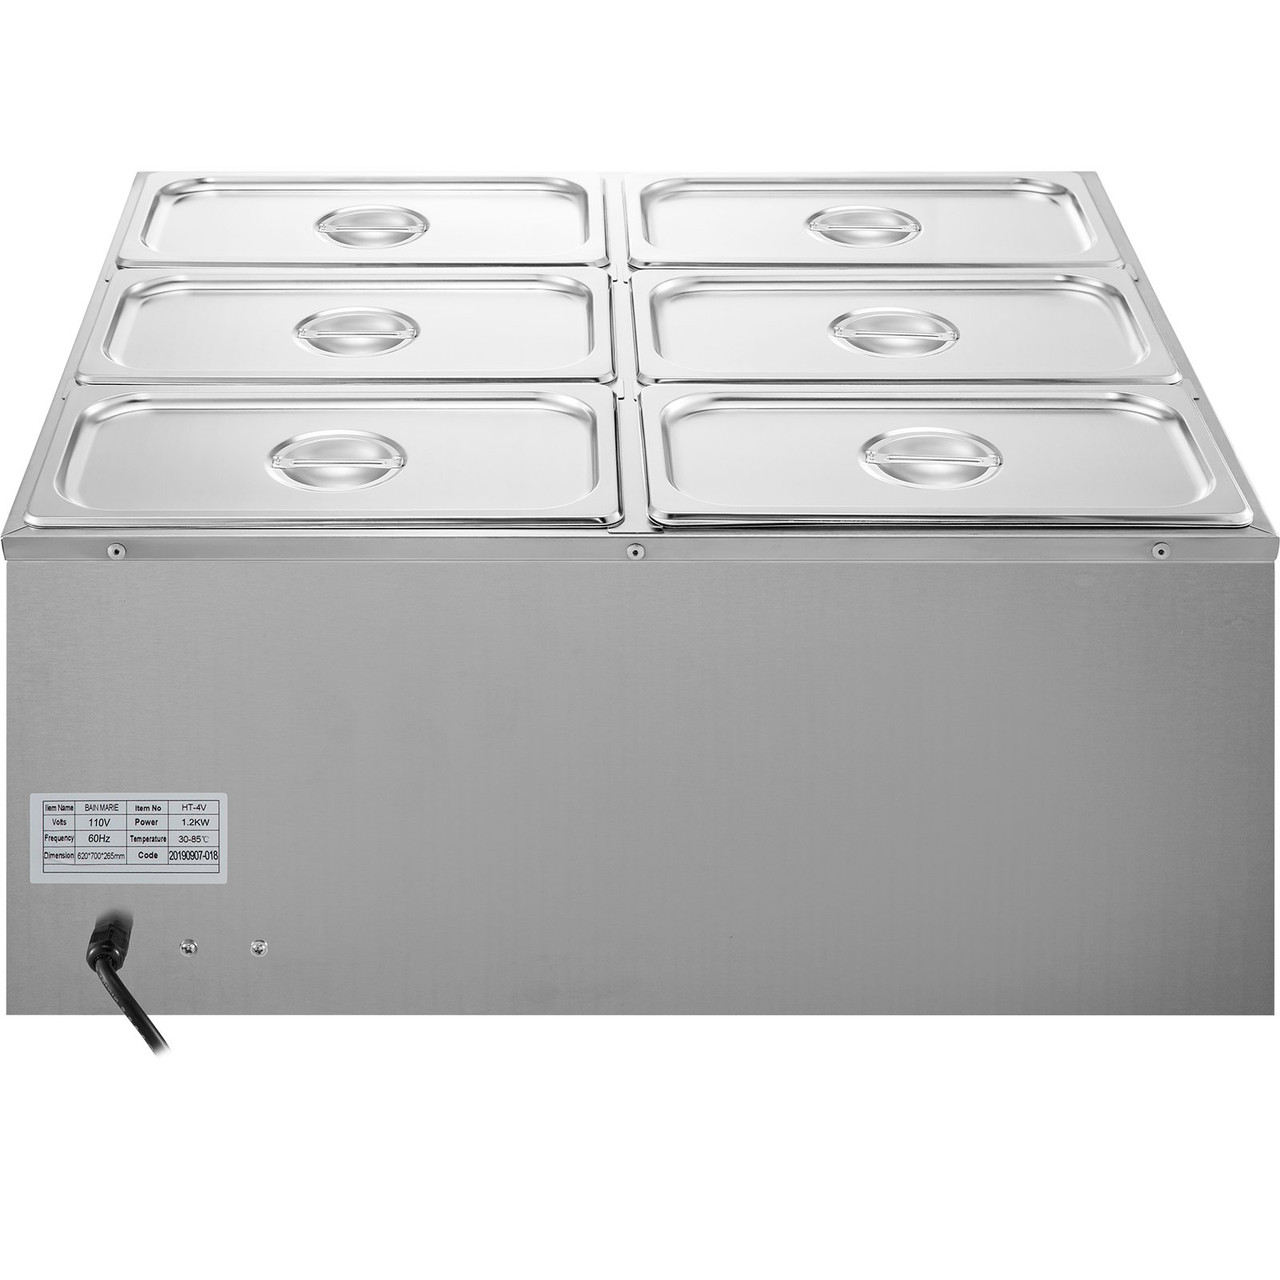 110V 6-Pan Commercial Food Warmer, 1200W Electric Steam Table 15cm/6inch Deep, Professional Stainless Steel Buffet Bain Marie 32 Quart Capacity for Catering and Restaurants